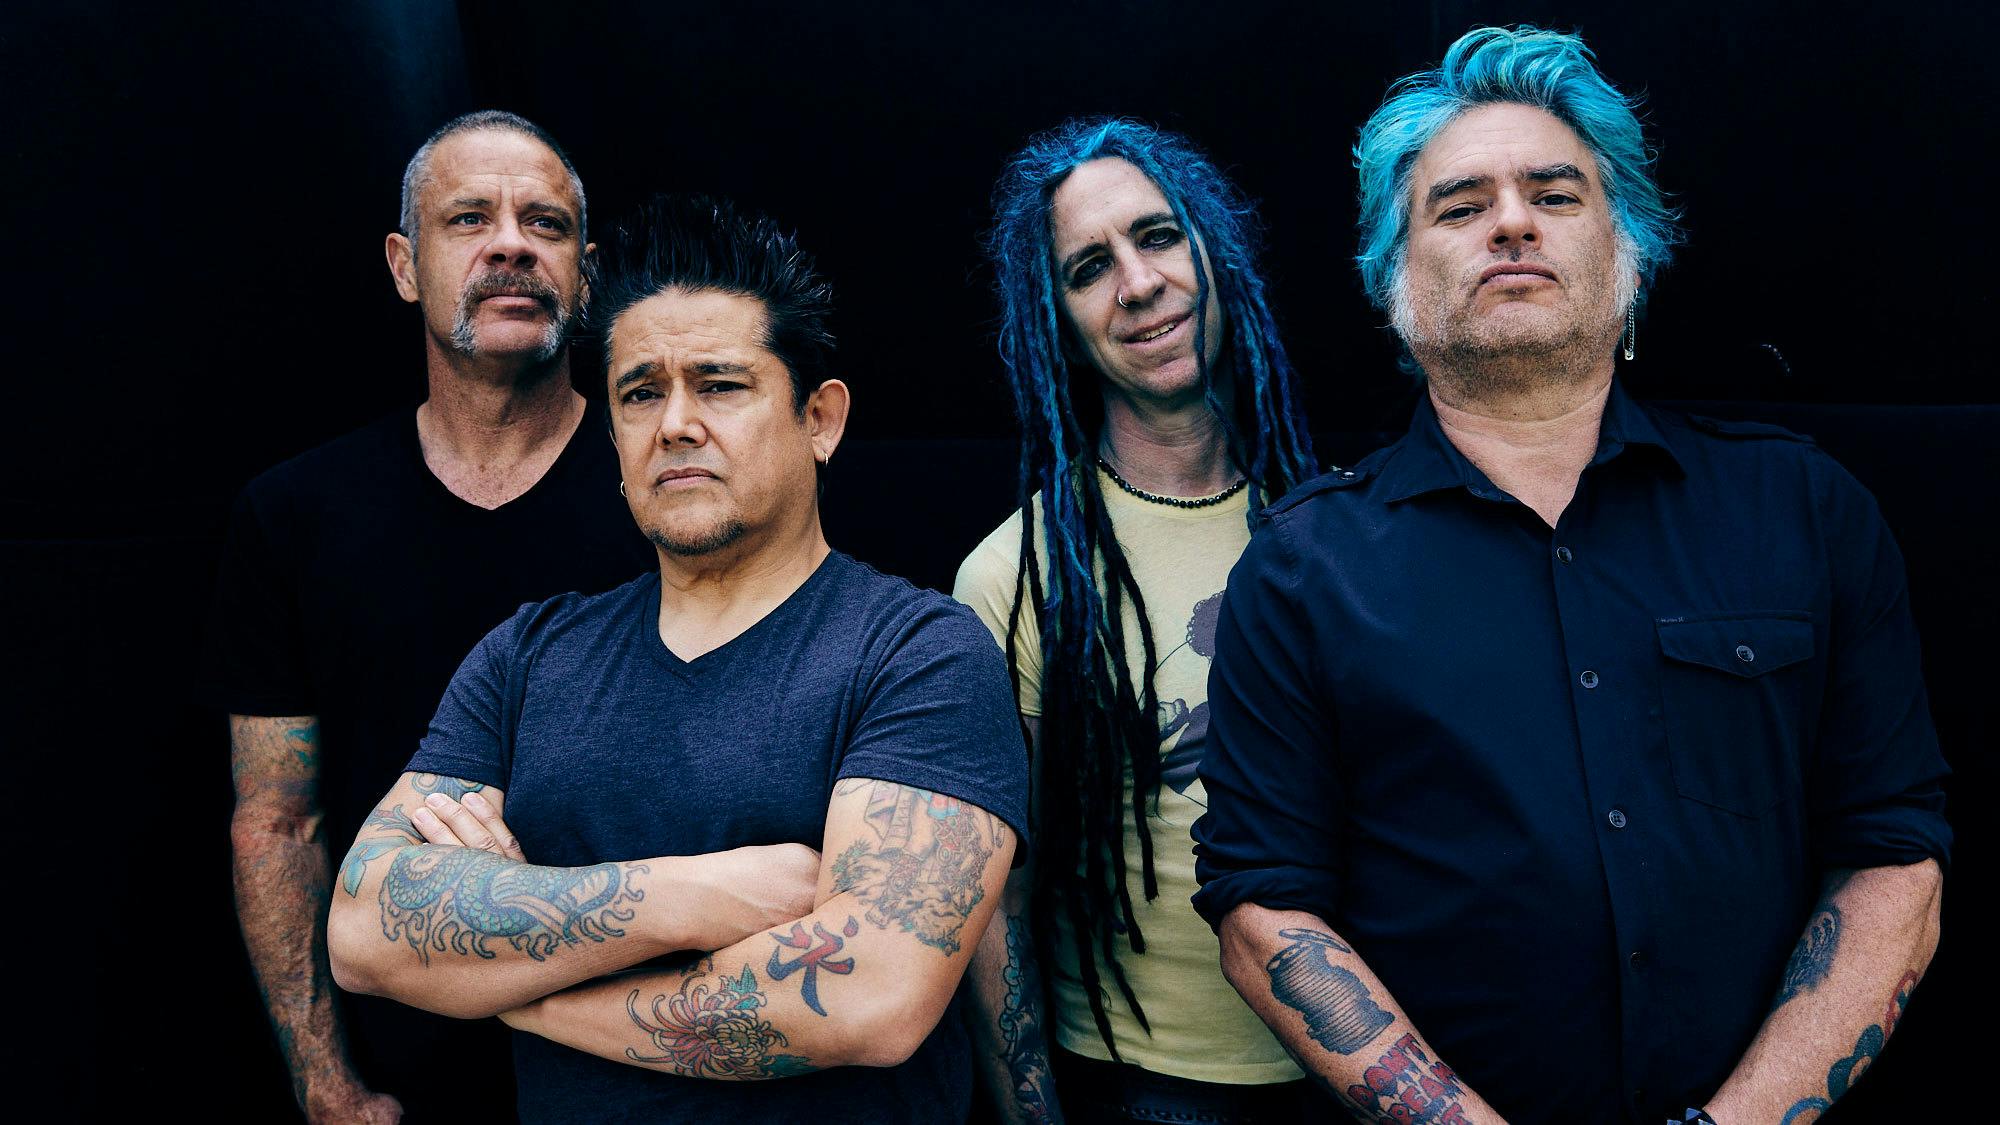 NOFX drop off Punk Rock Bowling after receiving hate messages and threats